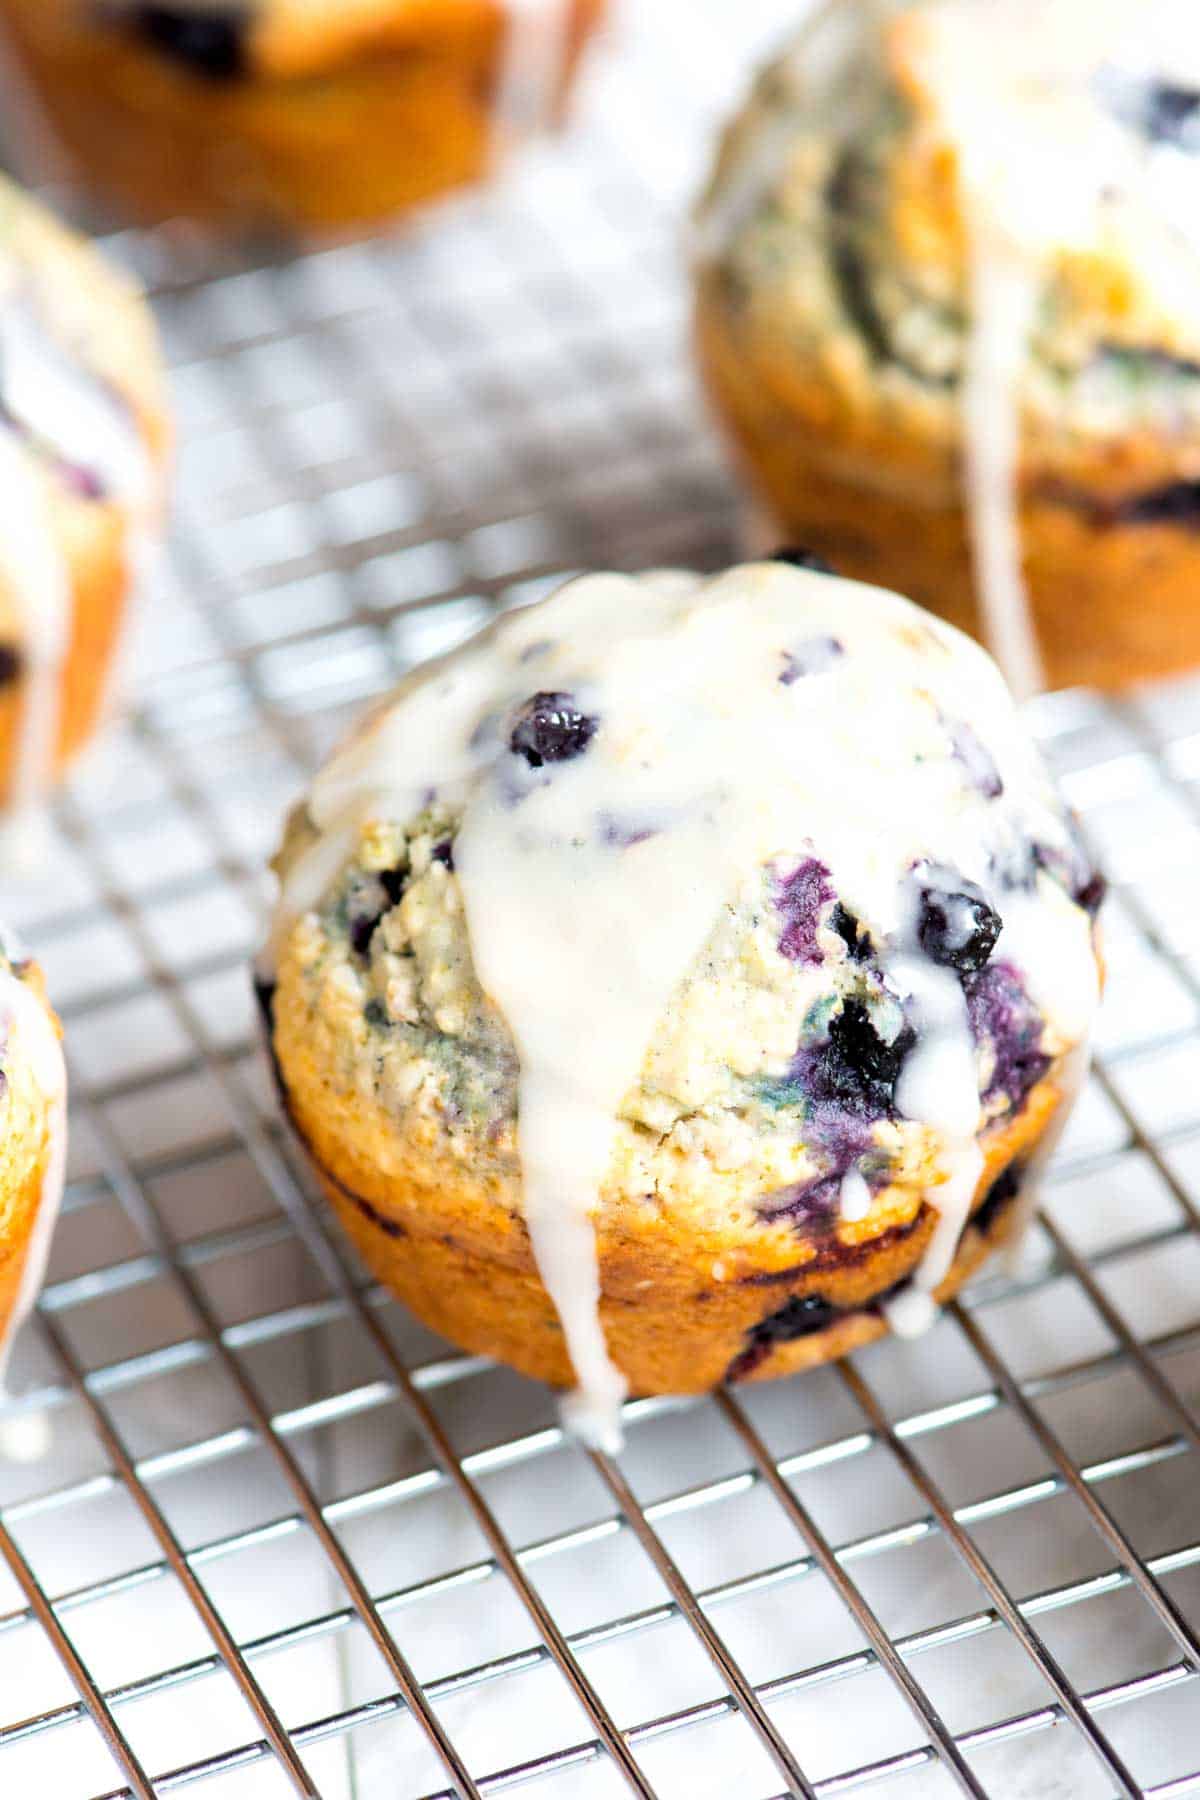 How to Make Ginger Blueberry Muffins